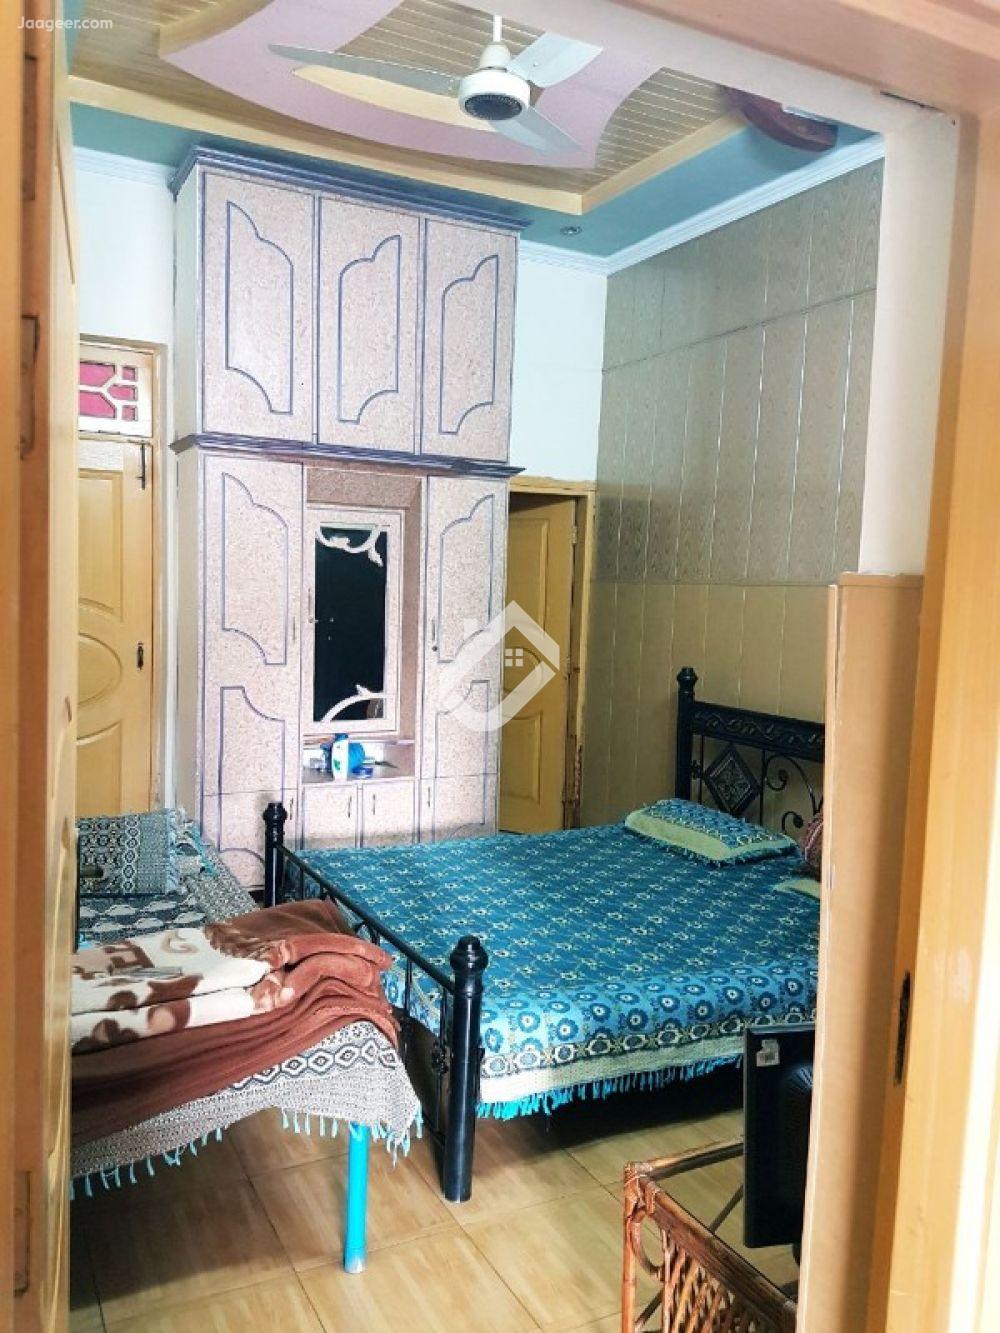 View  5 Marla House Is For Sale At Bhalwal Road in Bhalwal Road, Sargodha